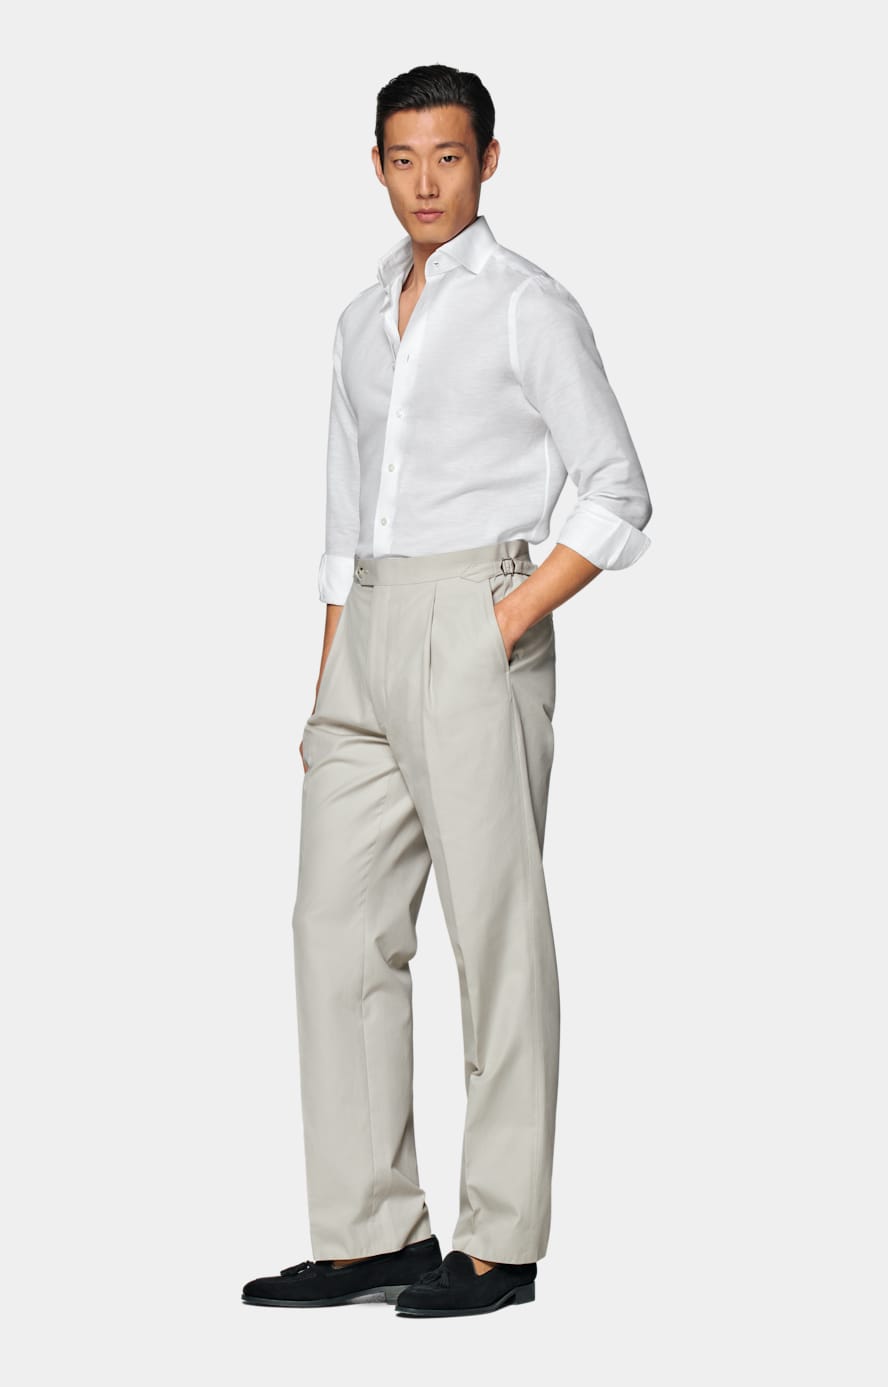 White Twill Extra Slim Fit Shirt in Cotton Linen